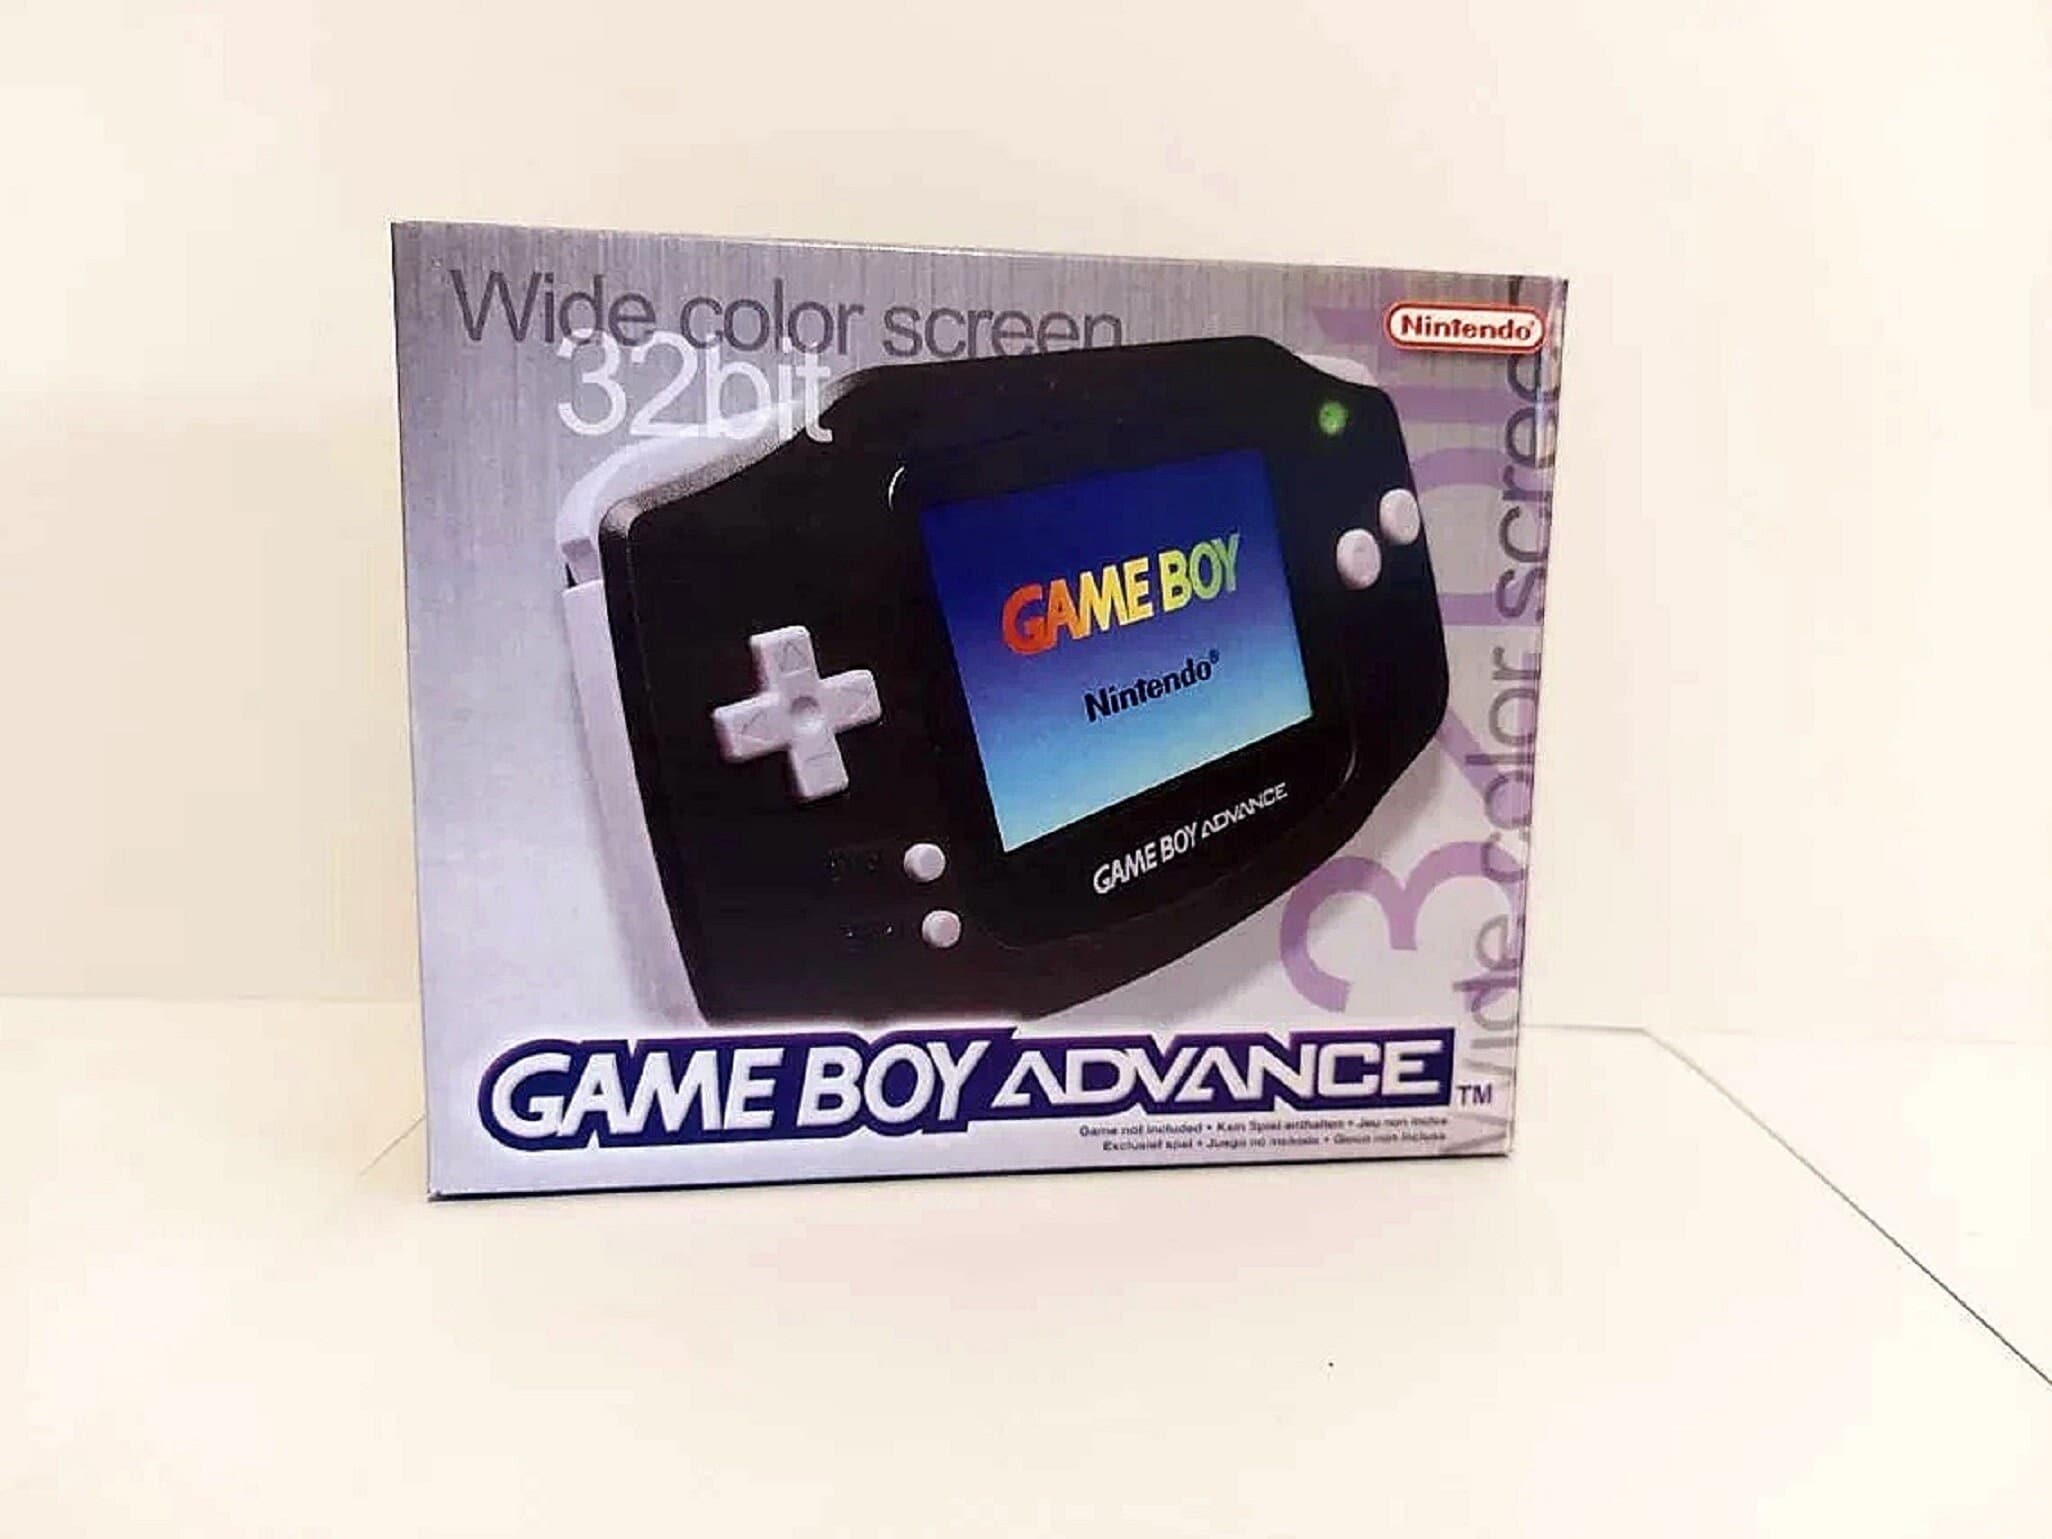 Why Aren't Game Boy Advance Games on Virtual Console?